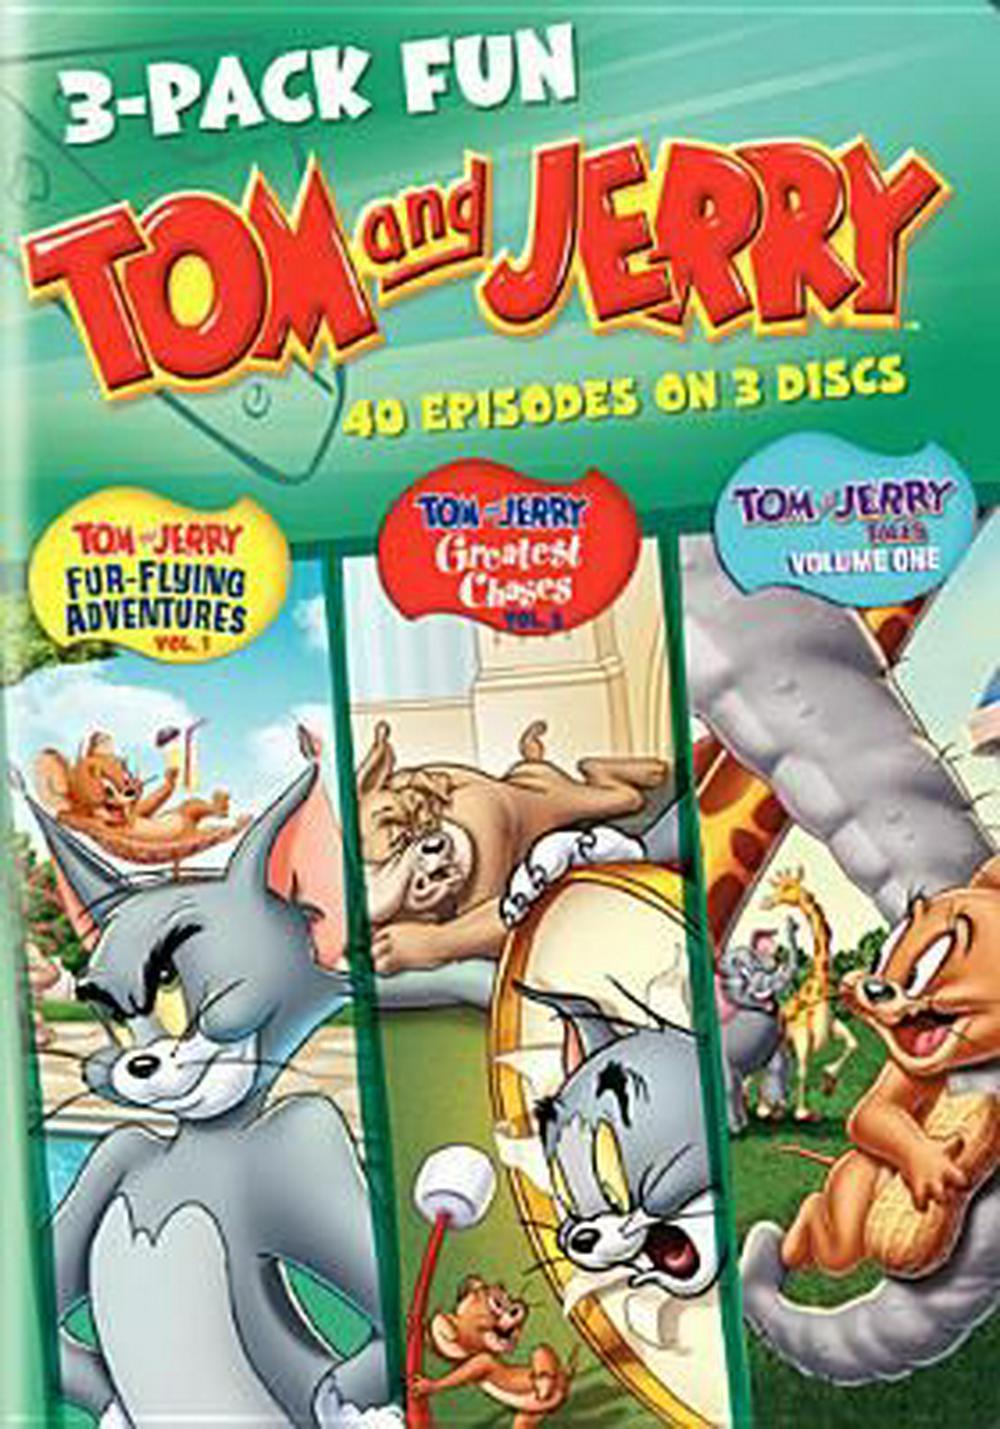 Tom and Jerry 3 Pack Fun